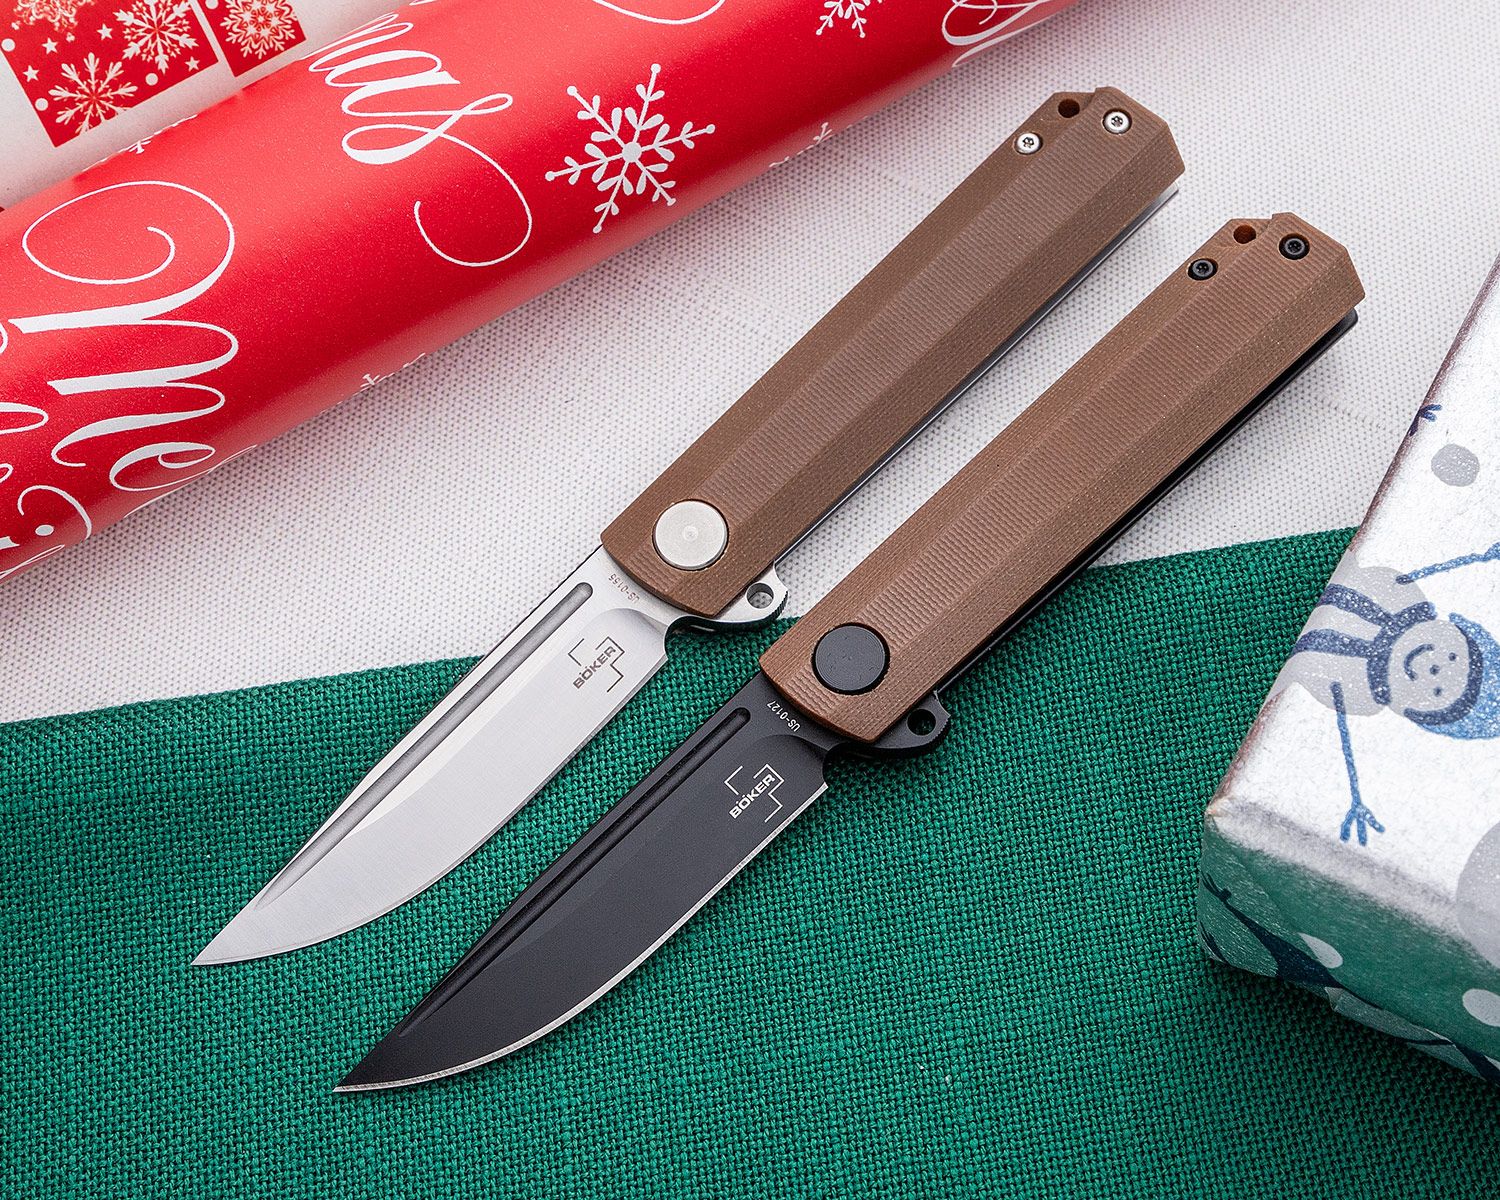 Boker Plus Cataclyst Flipper Knife 2.99 440C Satin Clip Point Blade, Brown  G10 and Stainless Steel Handles - KnifeCenter Exclusive - KnifeCenter -  01BO648SOI